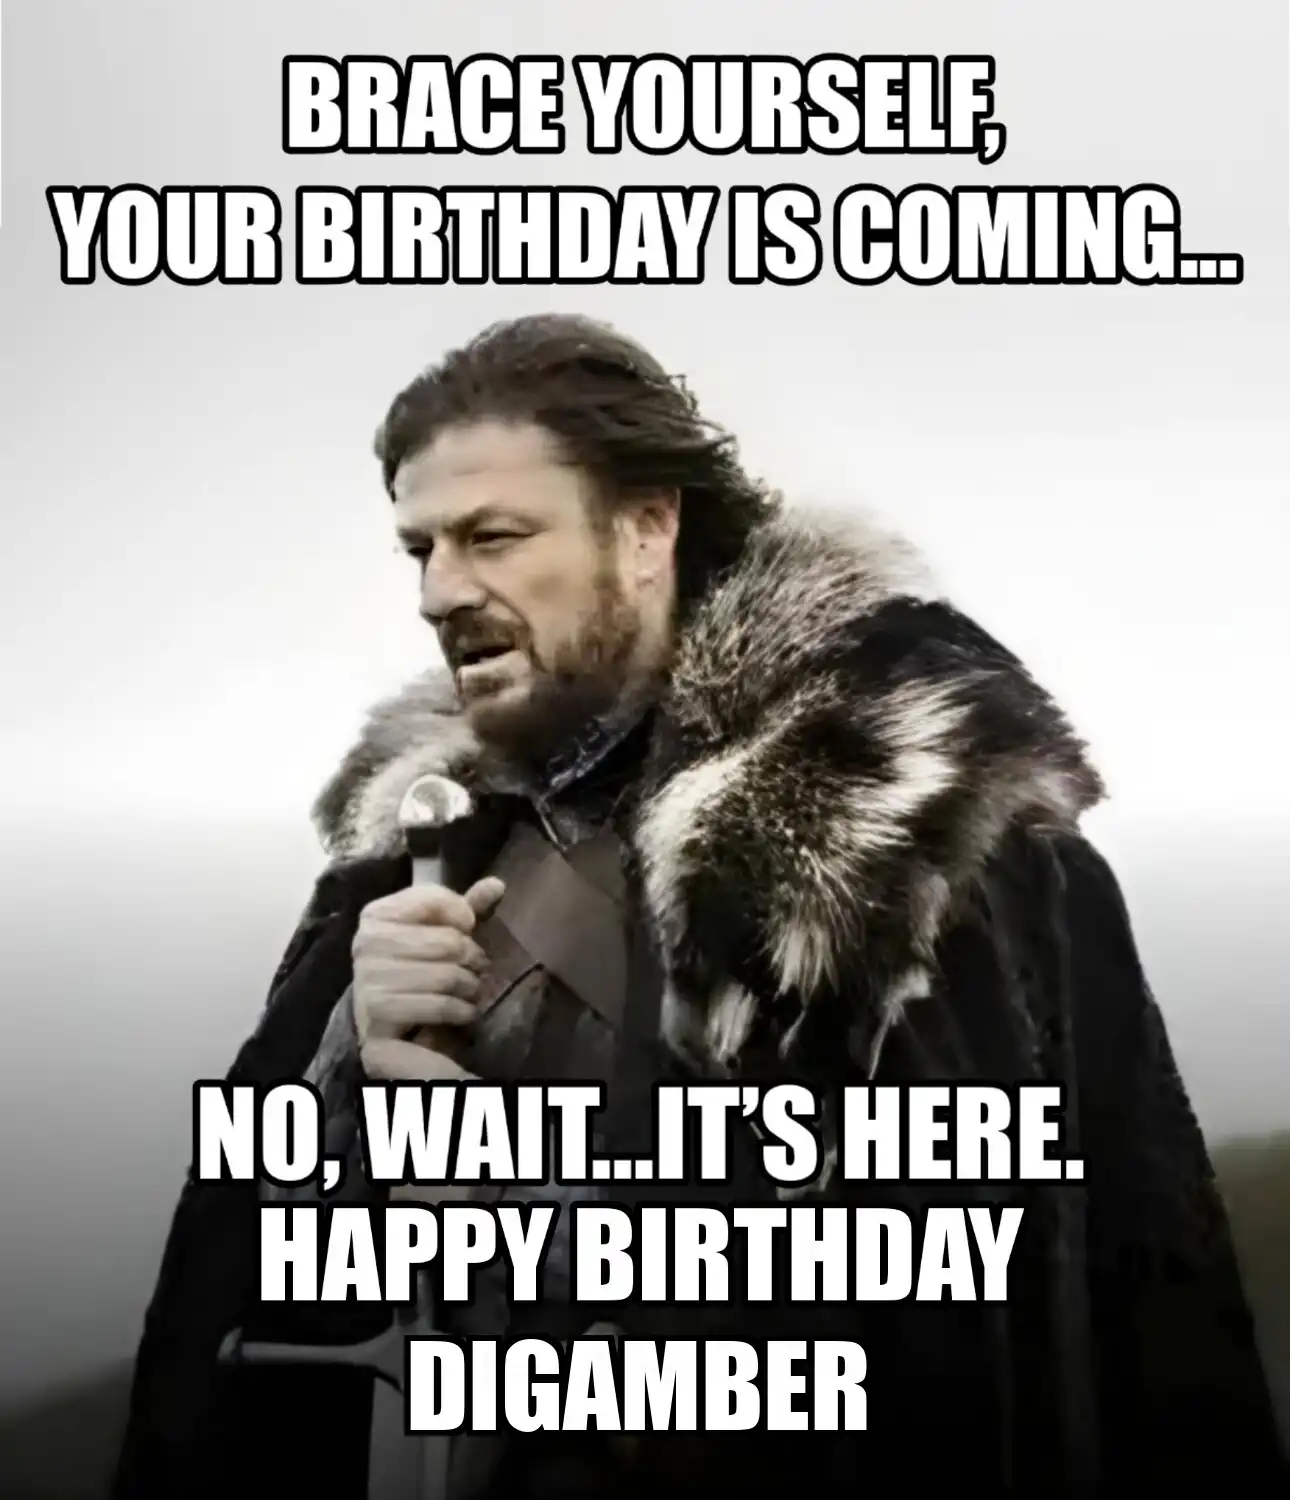 Happy Birthday Digamber Brace Yourself Your Birthday Is Coming Meme